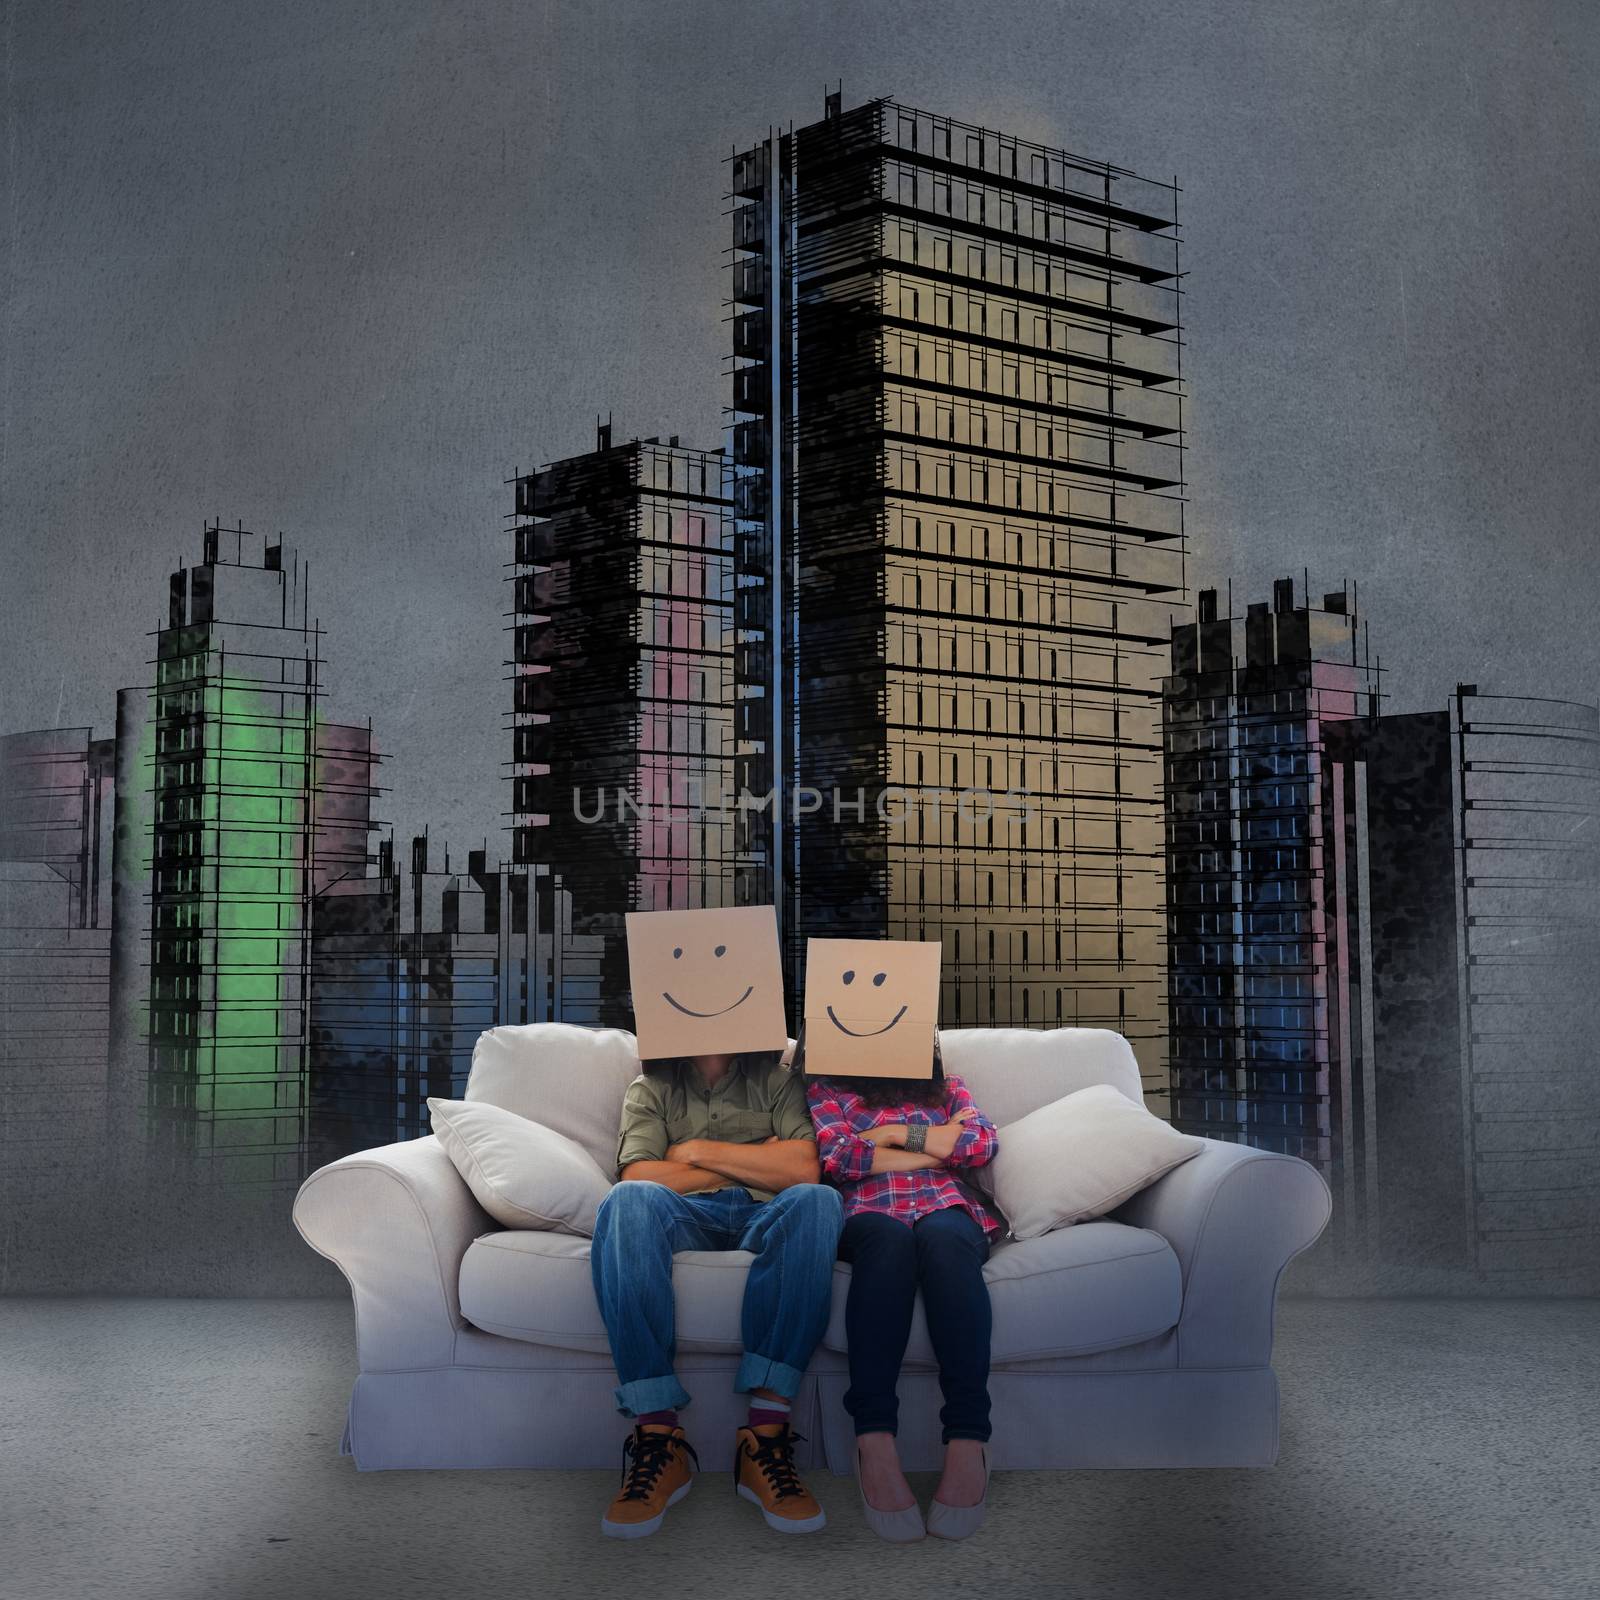 Couple sitting on couch in front of painted city by Wavebreakmedia